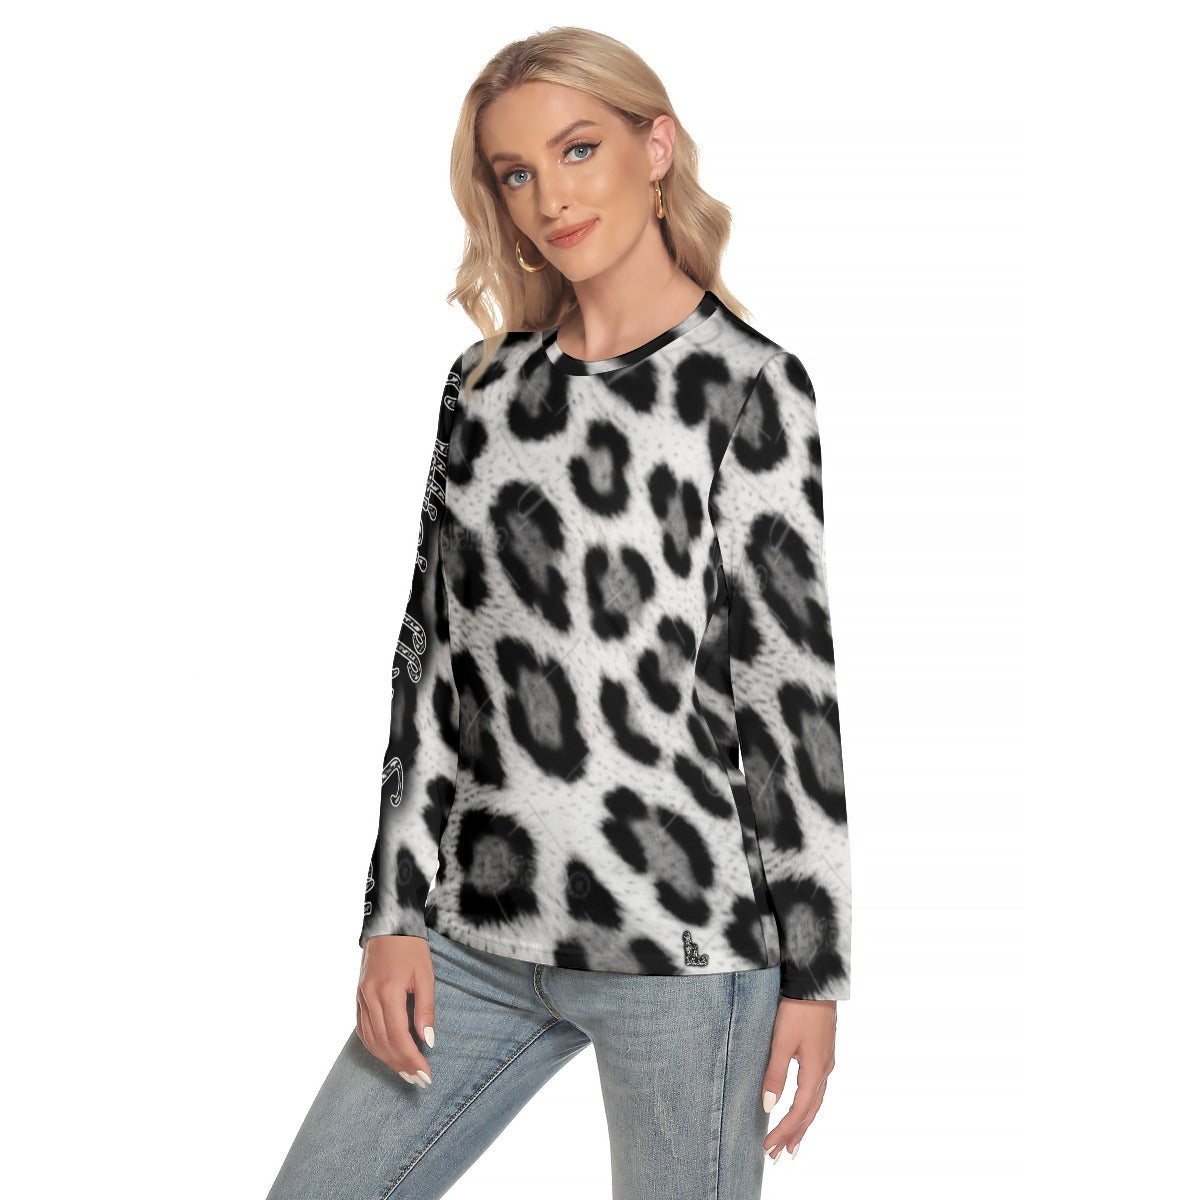 Officially Sexy Snow Leopard Print Collection Women's AOLP O-neck Long Sleeve T-shirt (English) 4